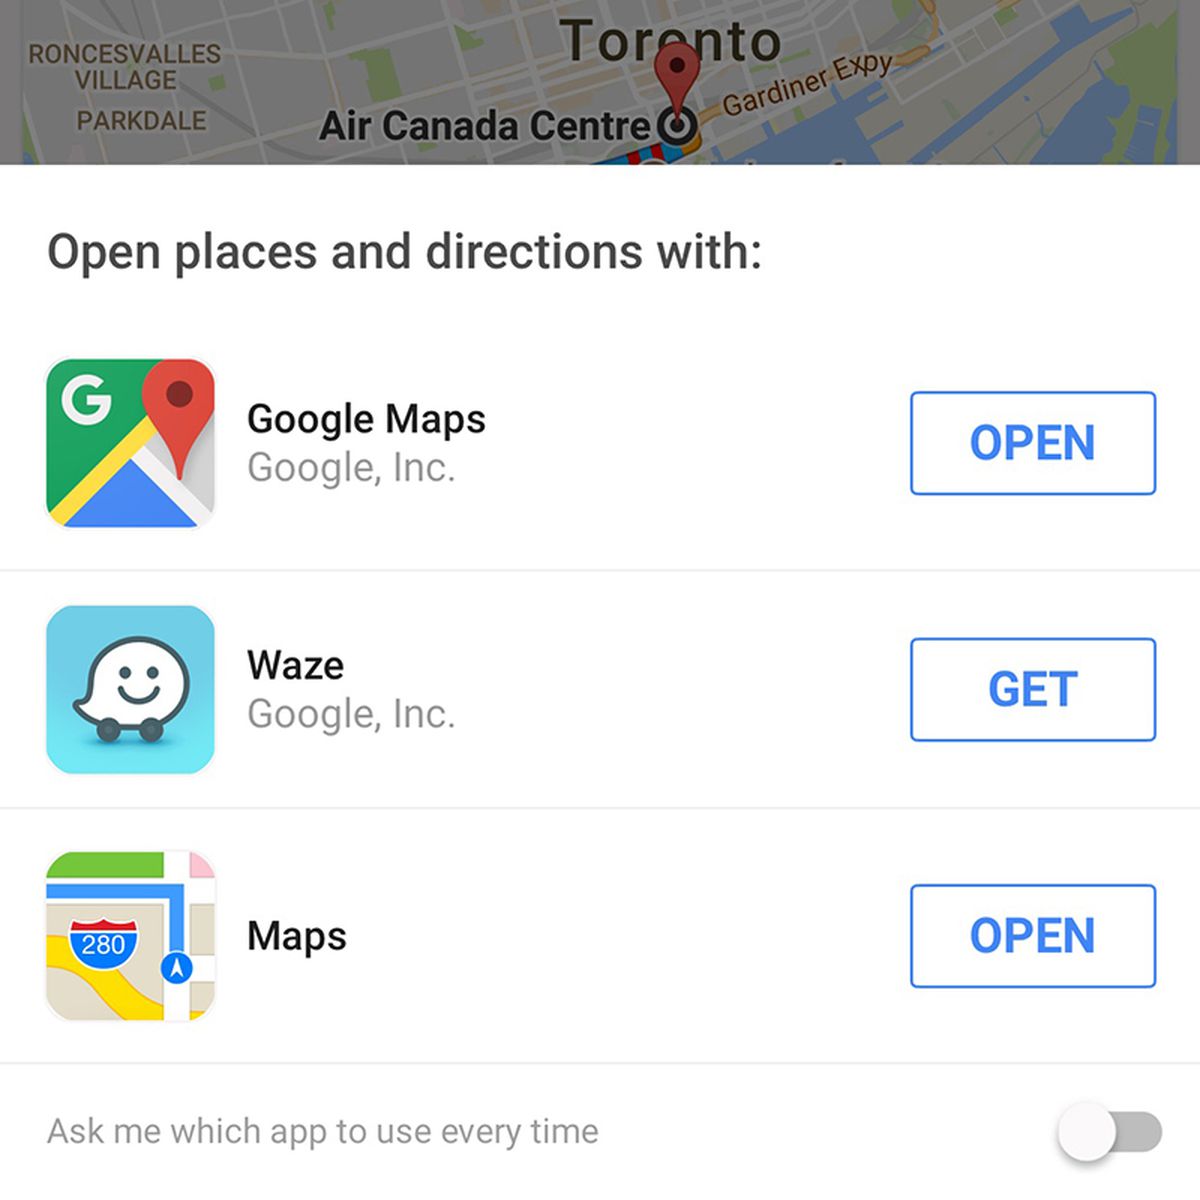 get directions with apple maps or waze